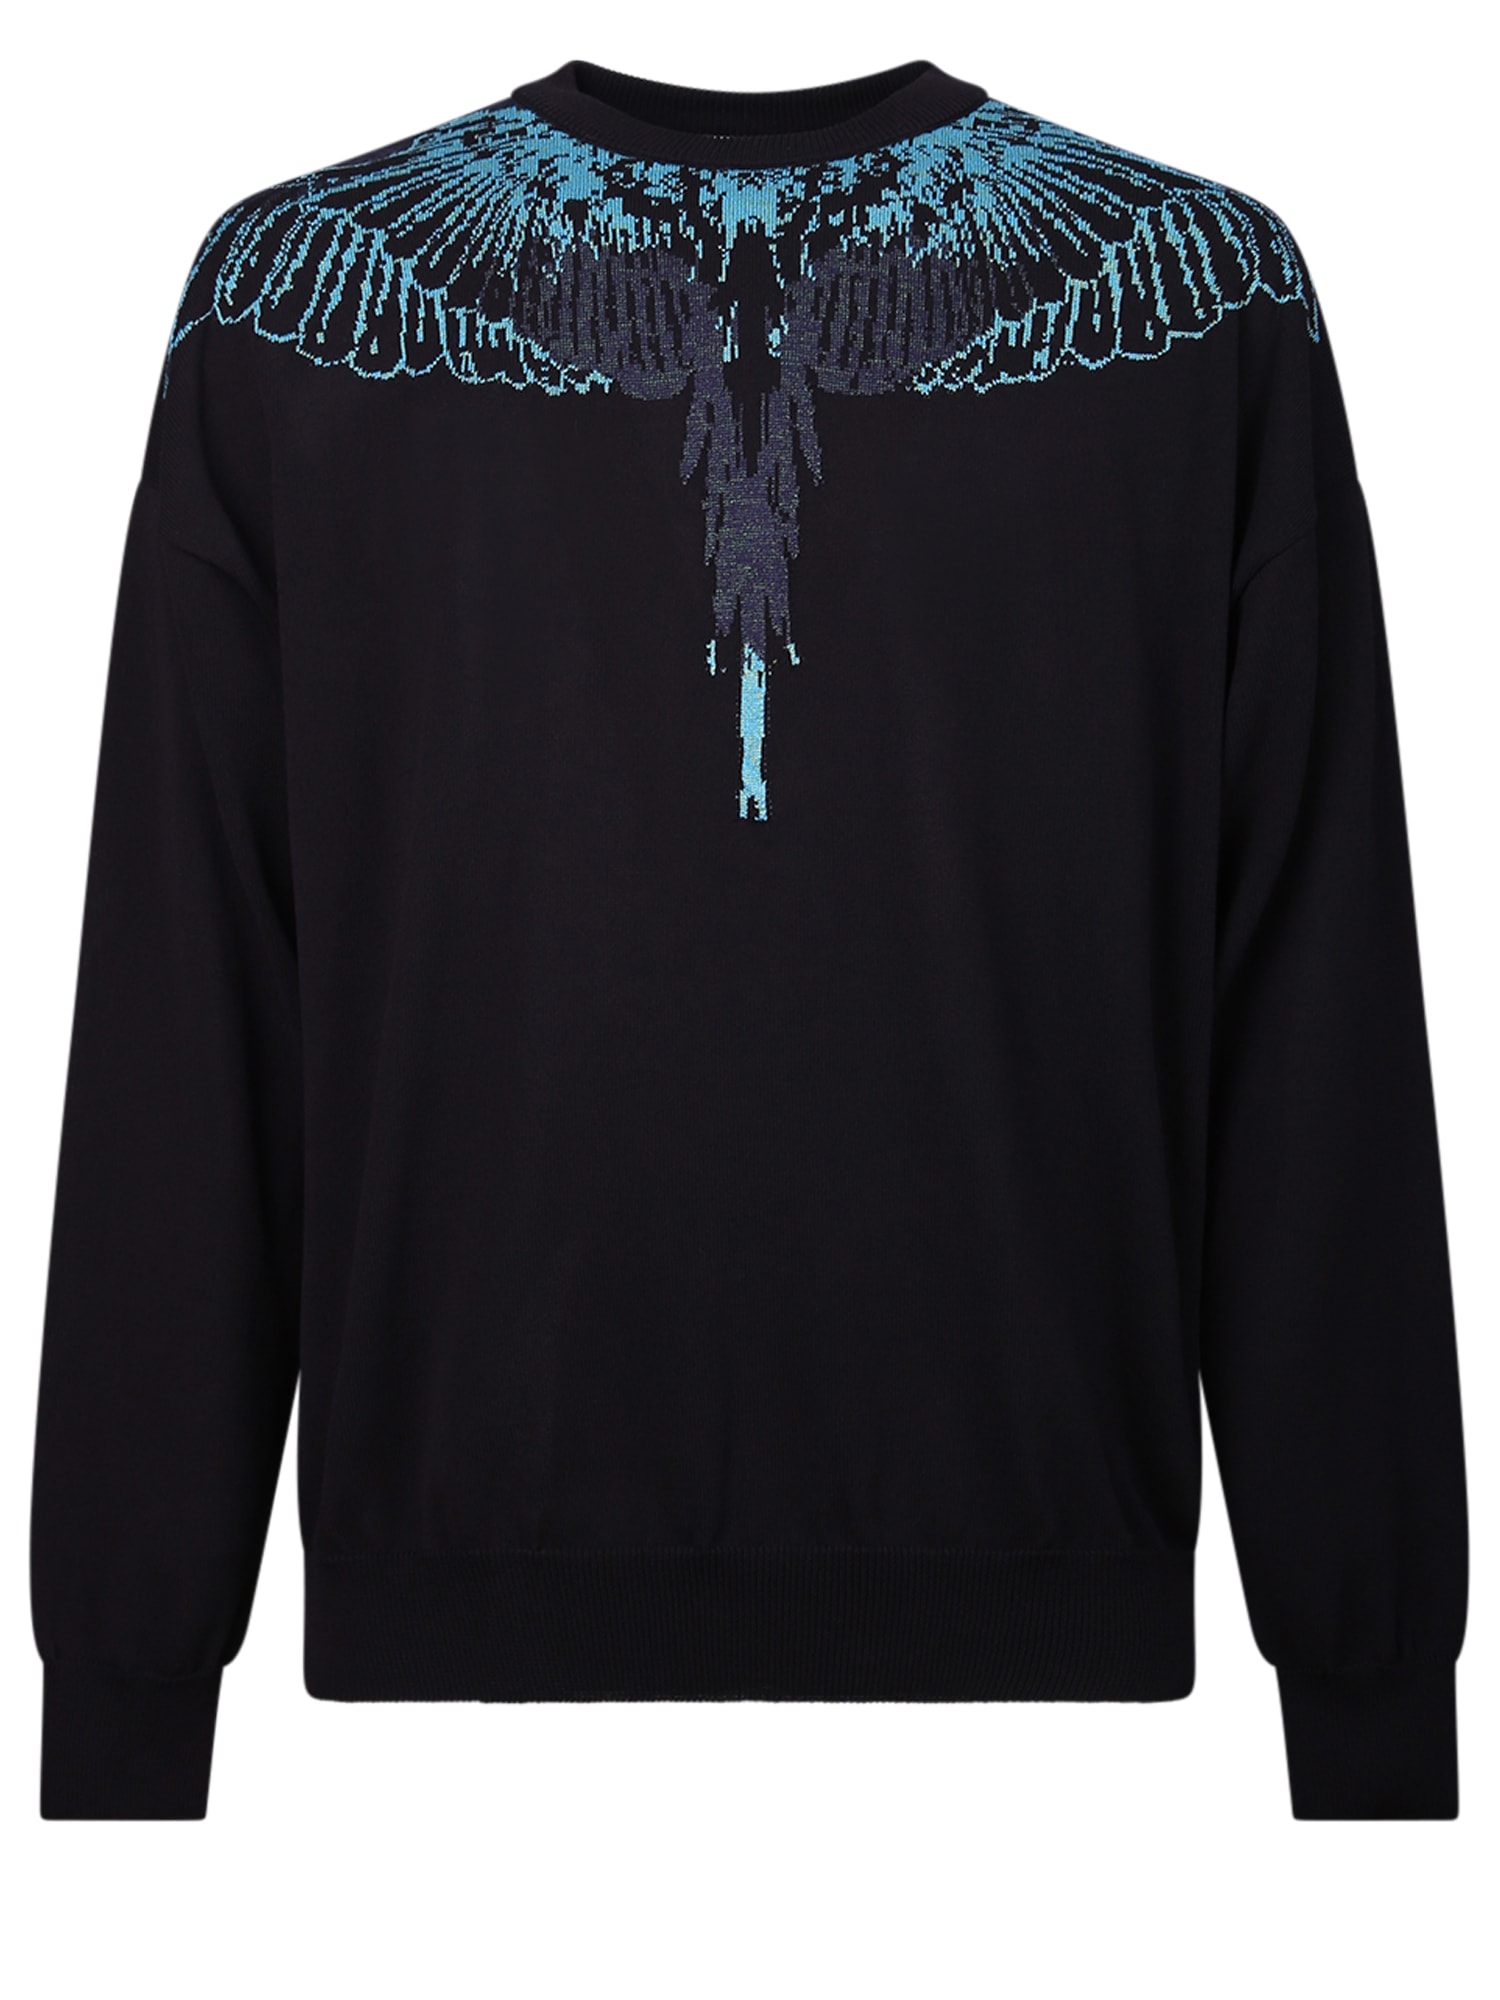 Marcelo Burlon relaxed fit sweater